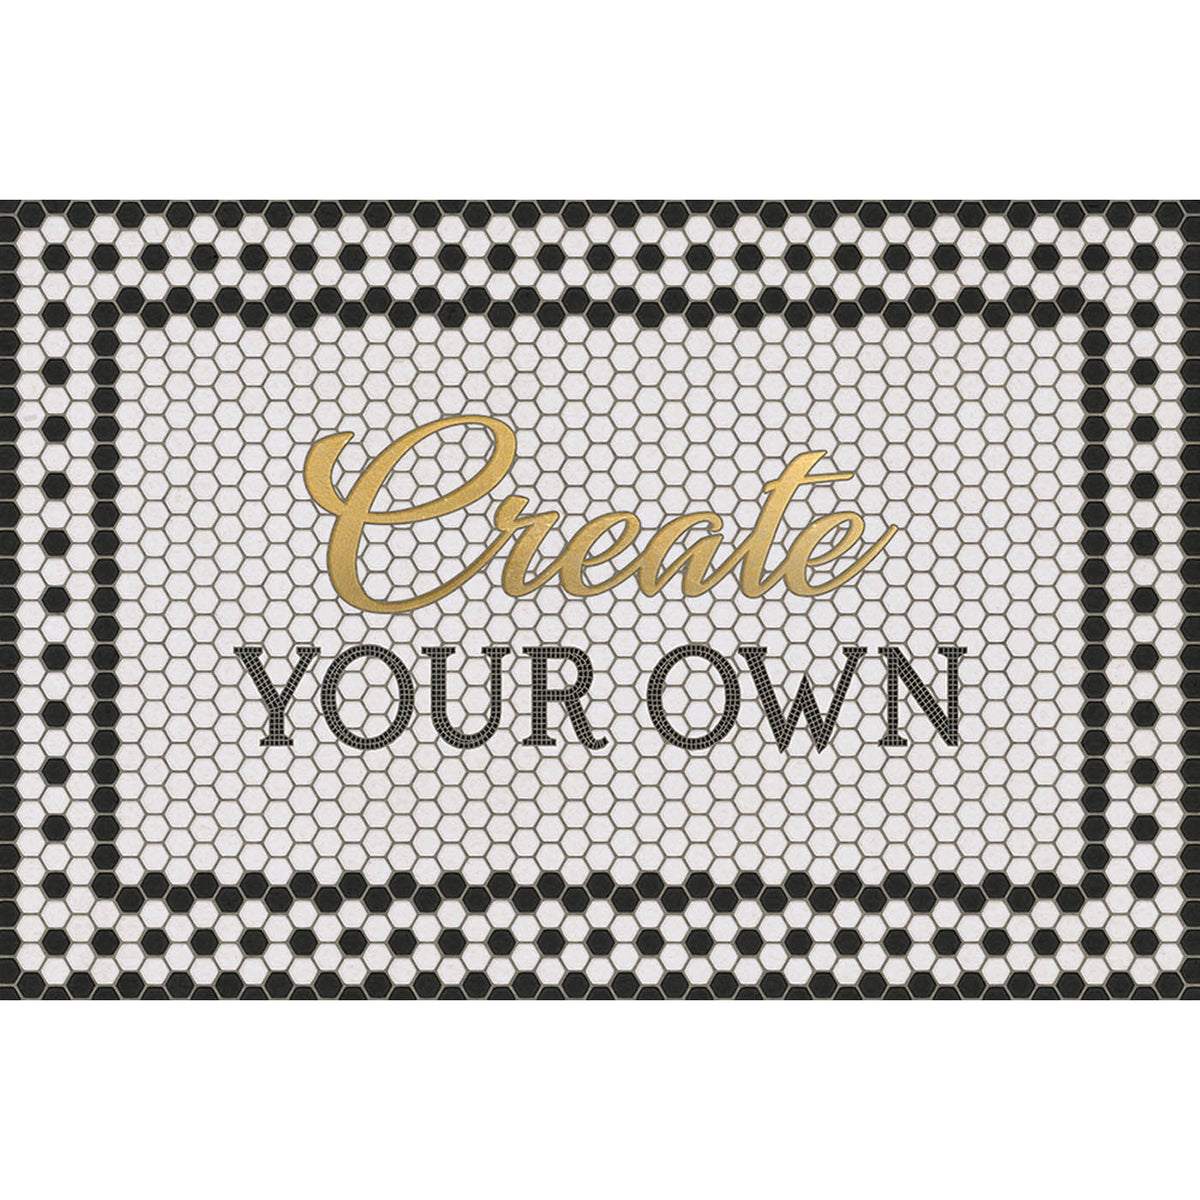 Mosaic Customized 8th Avenue Customized with Gold script 24x36